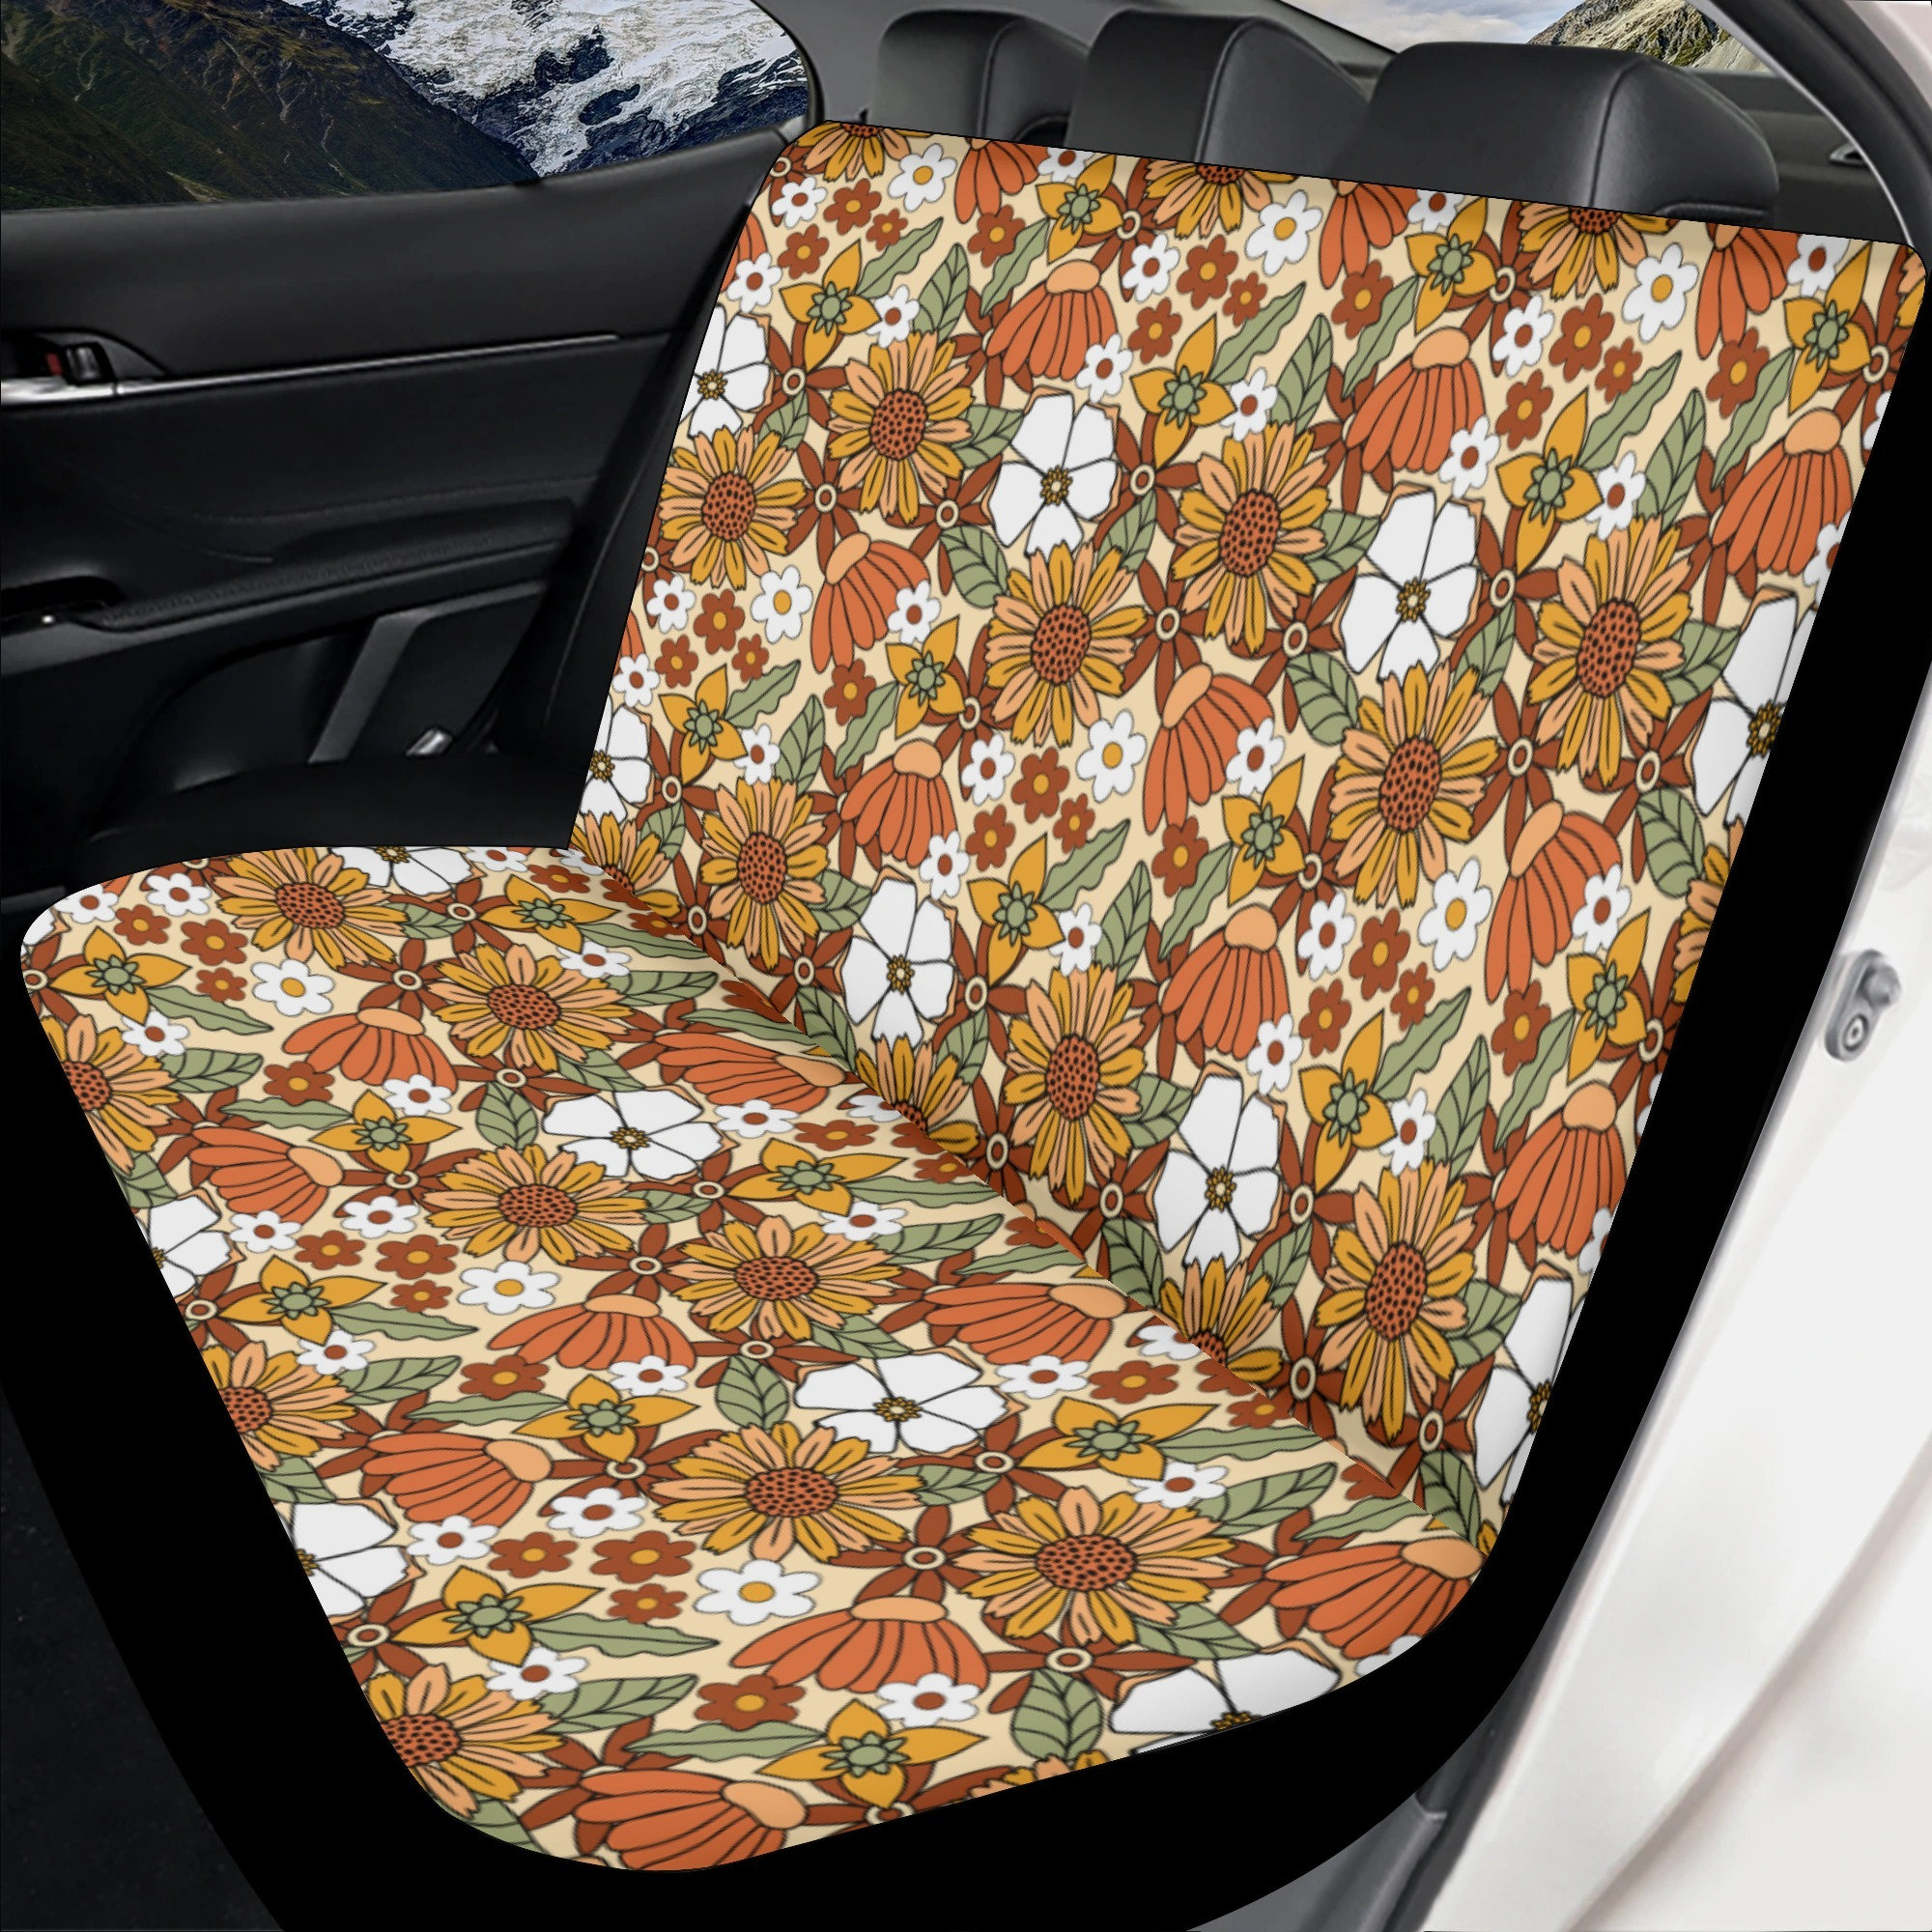 Boho Floral Hippie Car Seat Cover for Women